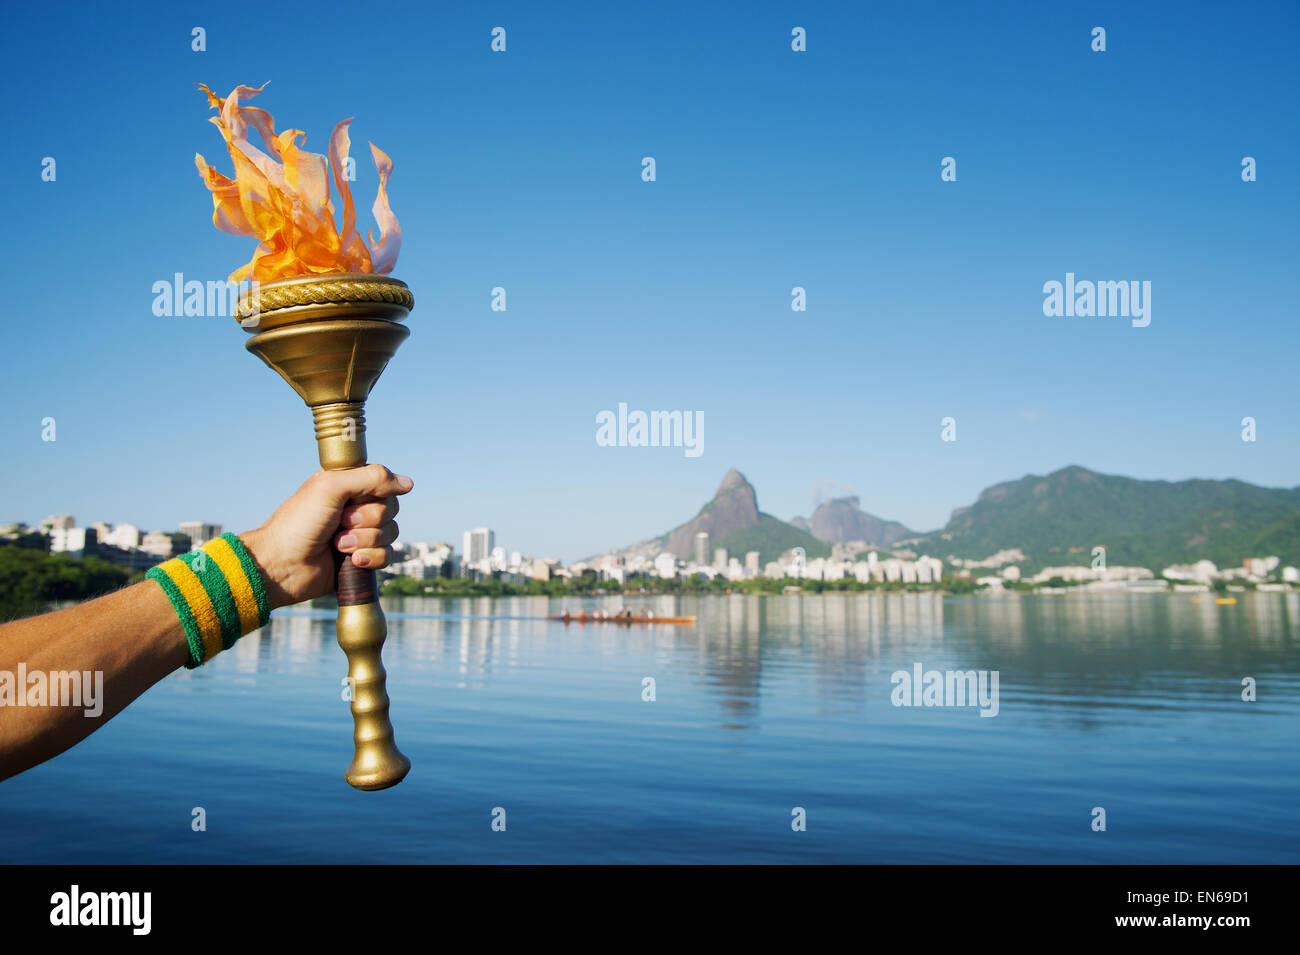 Hand of an athlete wearing sweatband holding sport torch against Rio de Janeiro Brazil skyline with Two Brothers Mountain Stock Photo